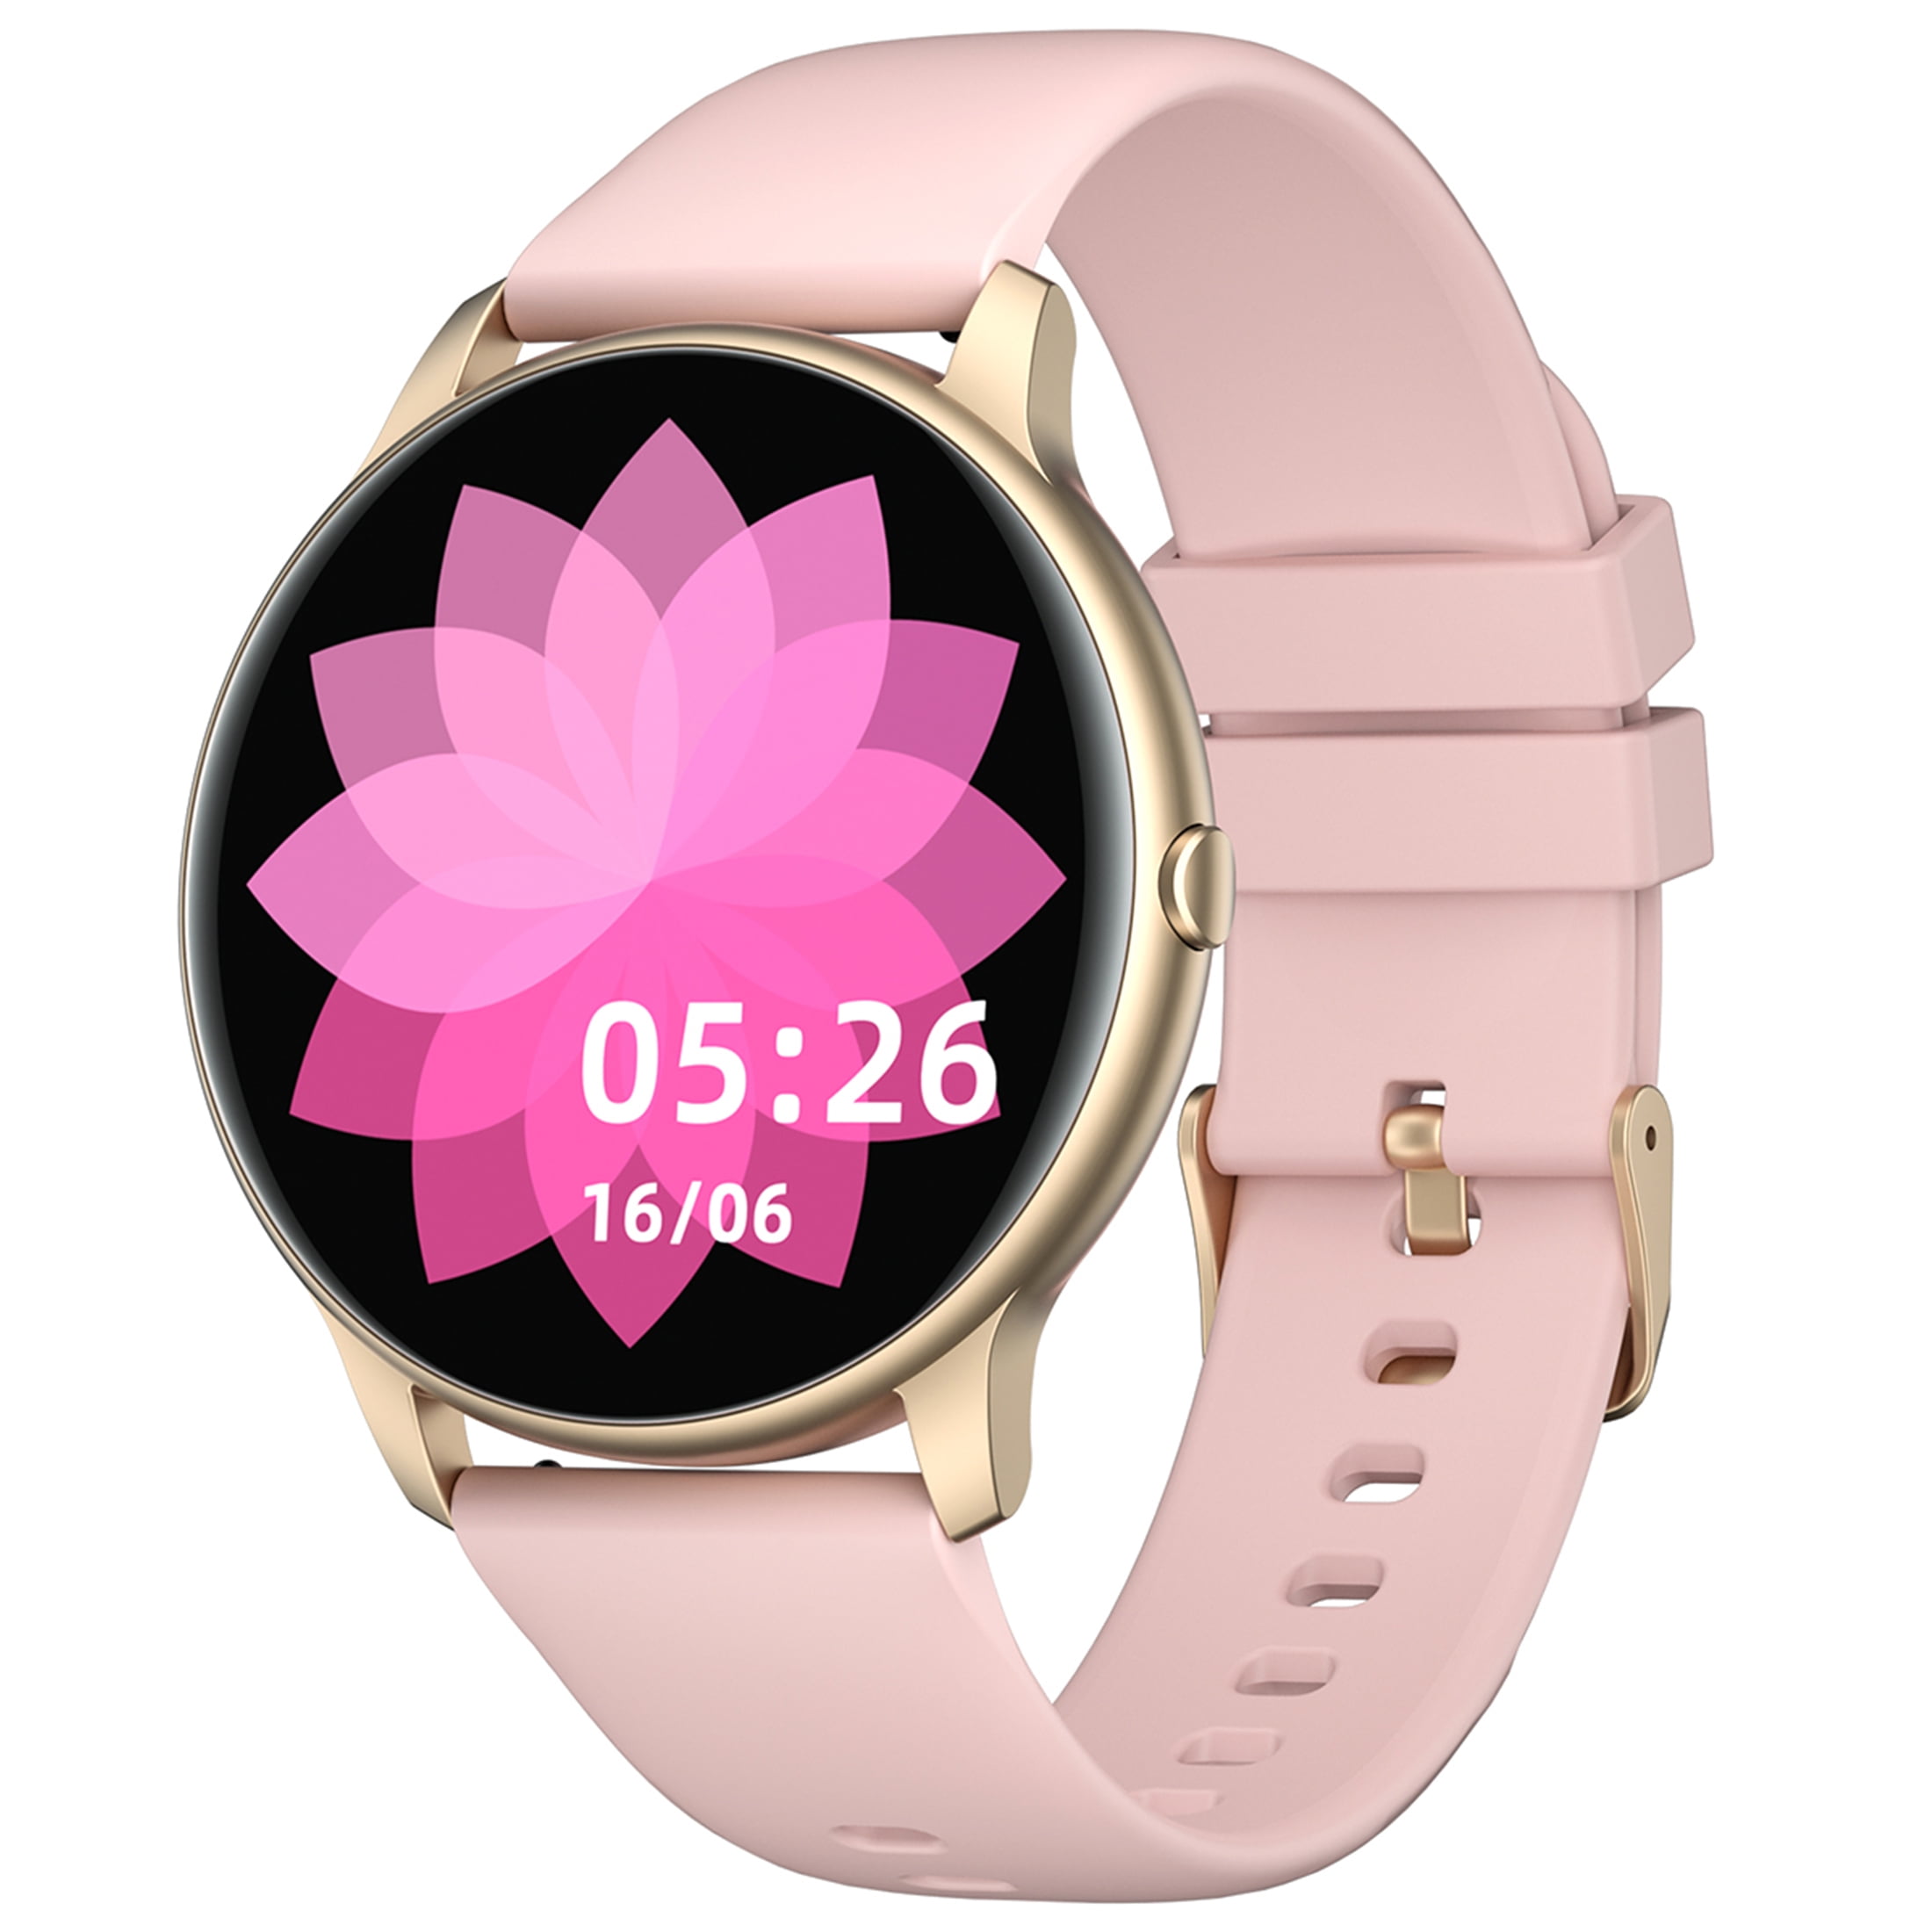 YAMAY SW022 Round Smart Watch for Android Samsung iPhone, Fitness Watch  with Steps Customized Watch Face IP68 Waterproof Smartwatch for Women Pink